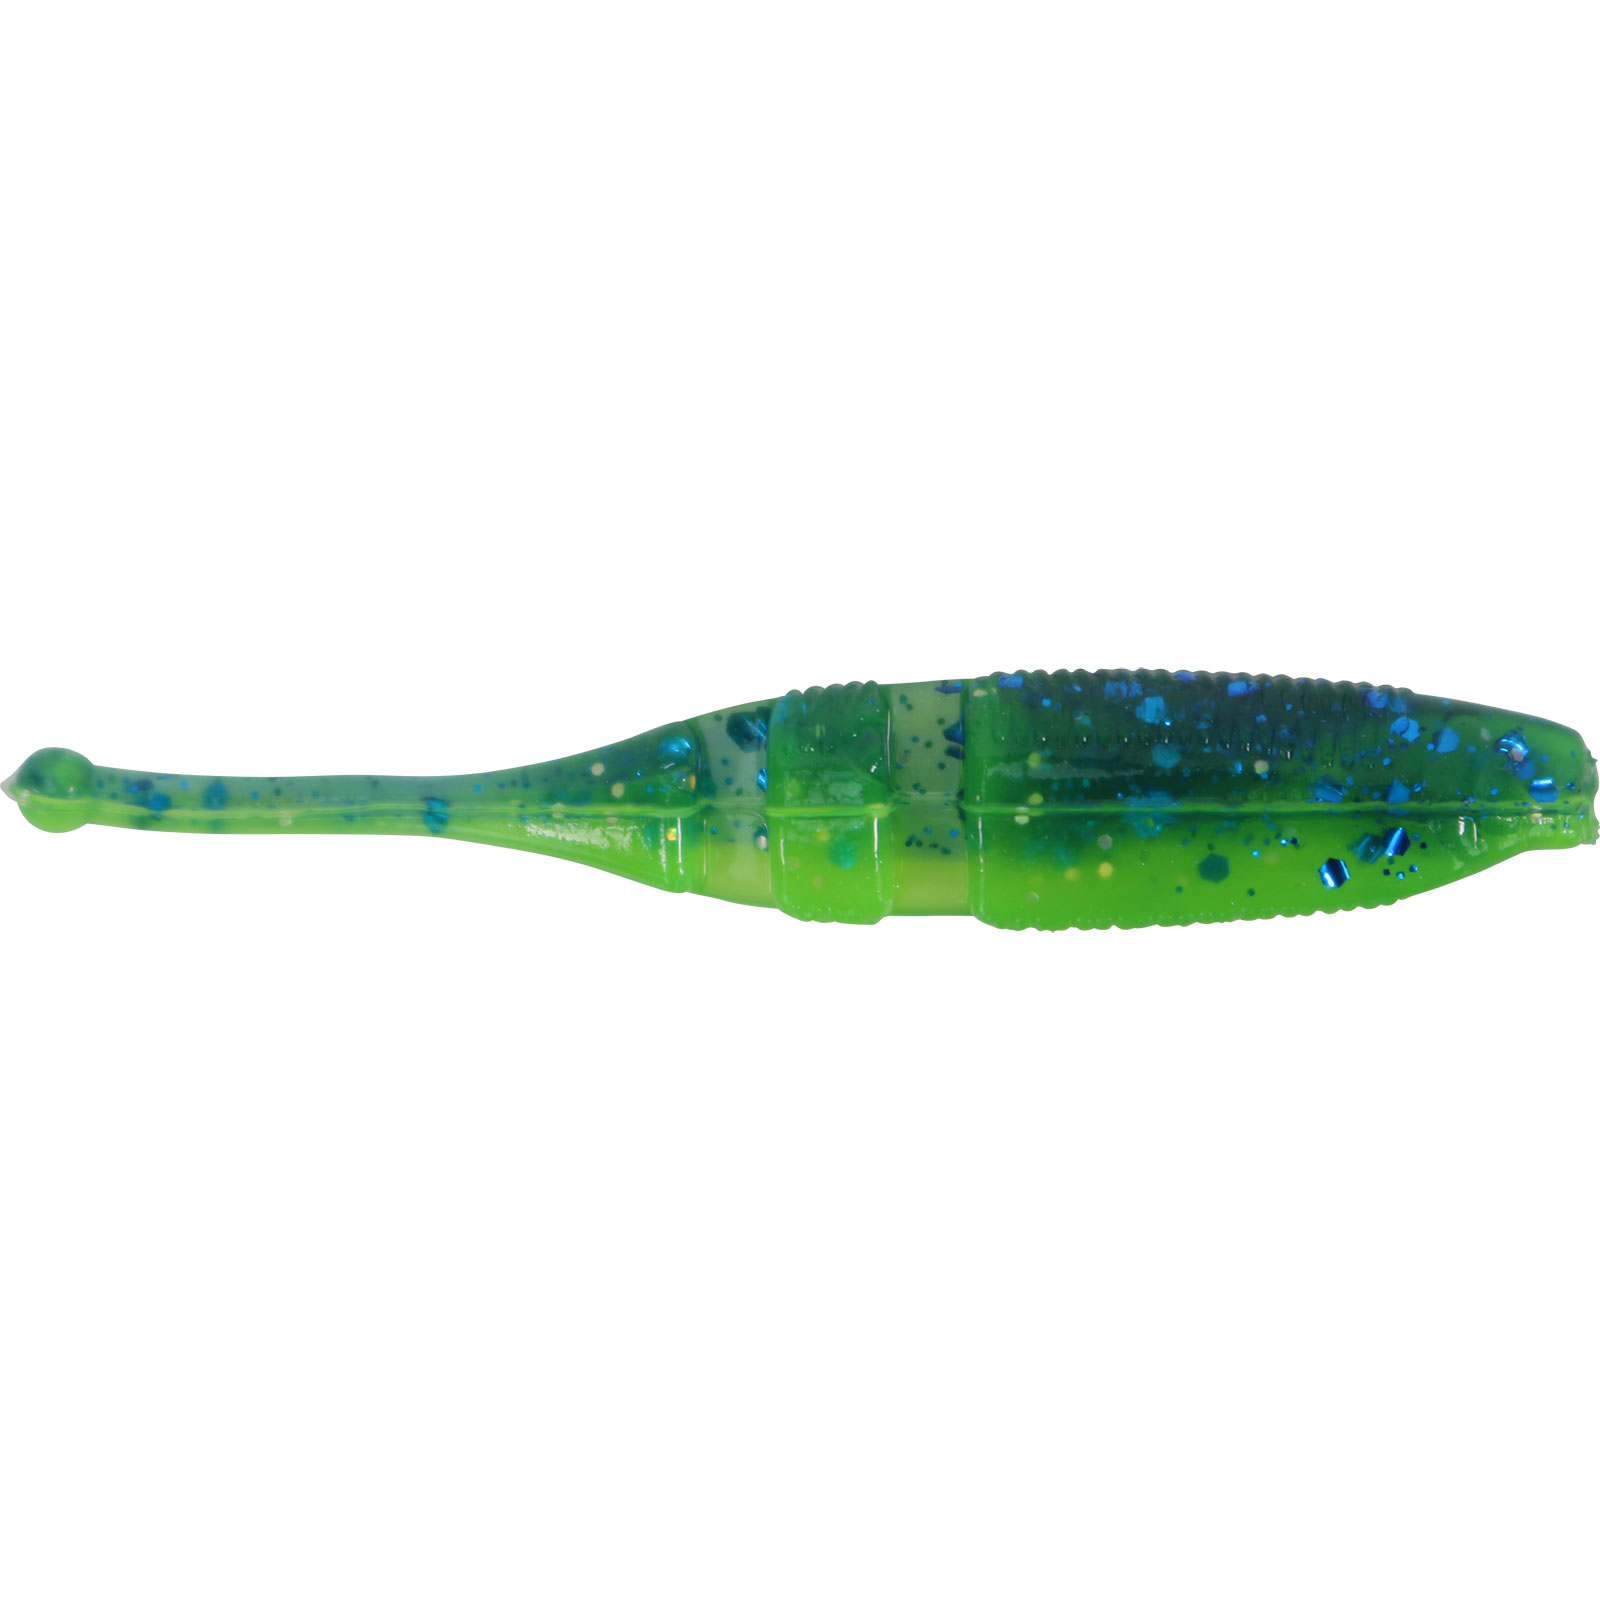 NPS Fishing - Lake Fork Trophy Lures LFT Sickle Tail Baby Shad